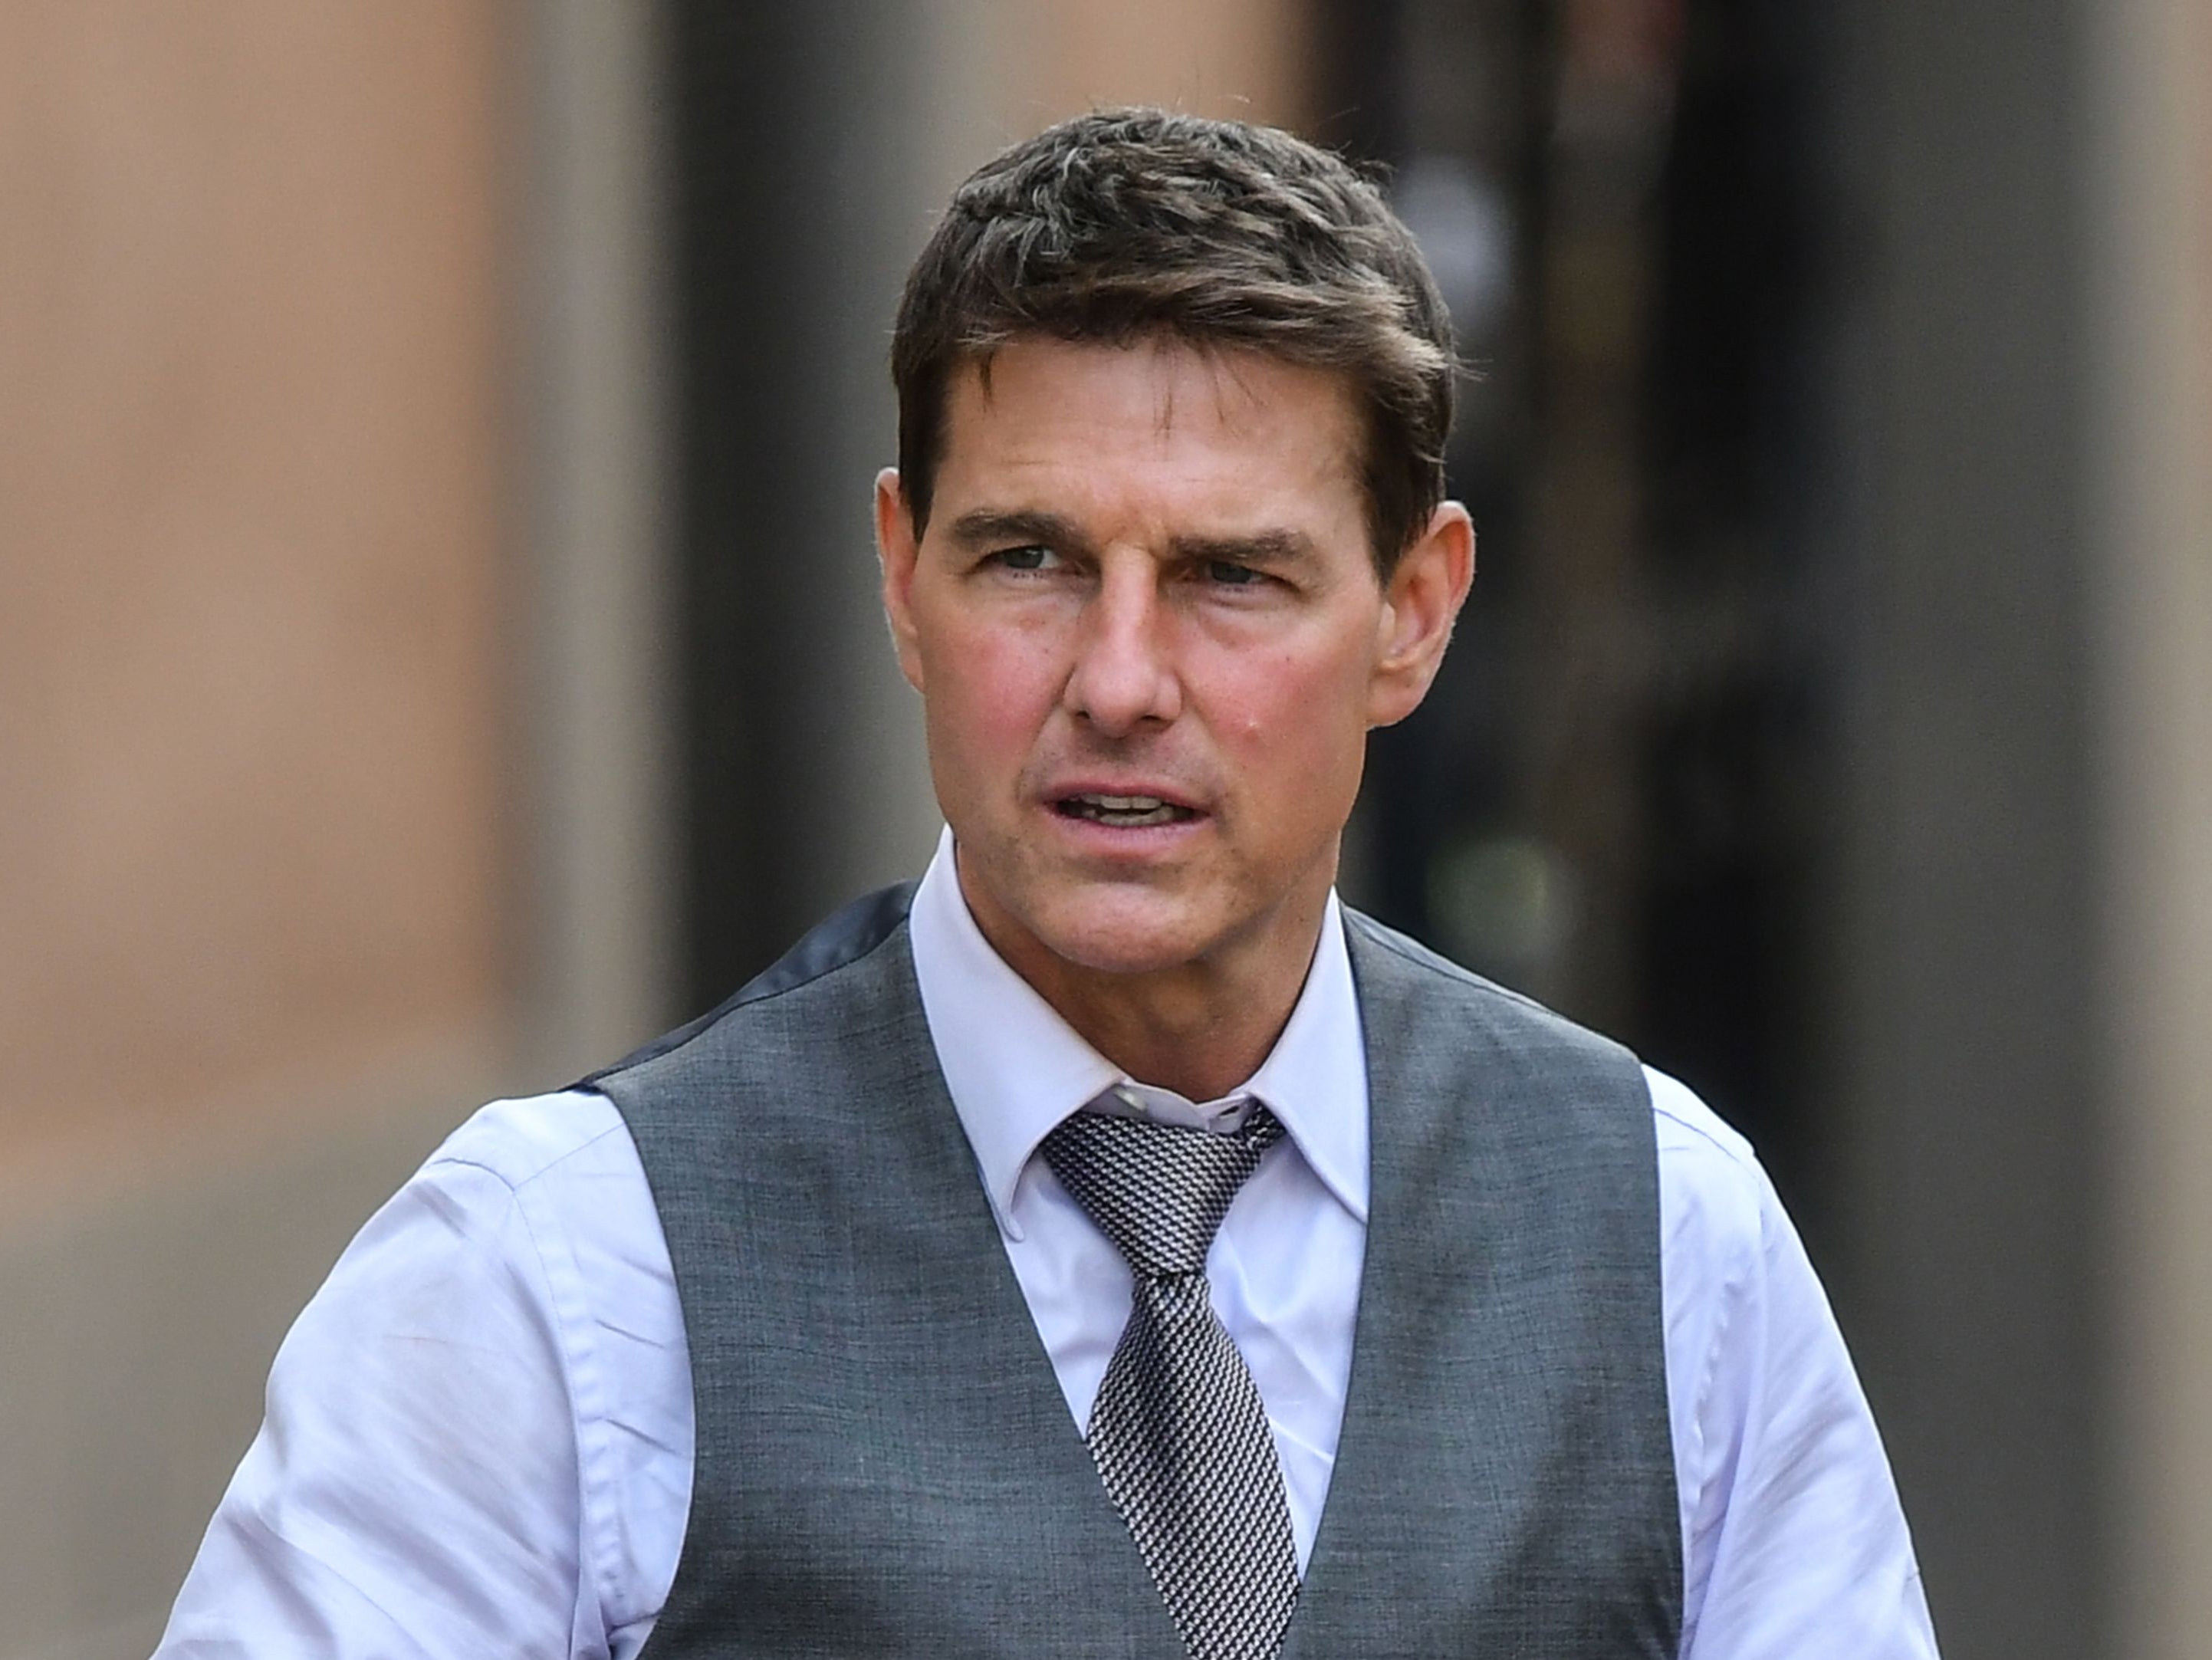 Cruise on the set of Mission: Impossible 7